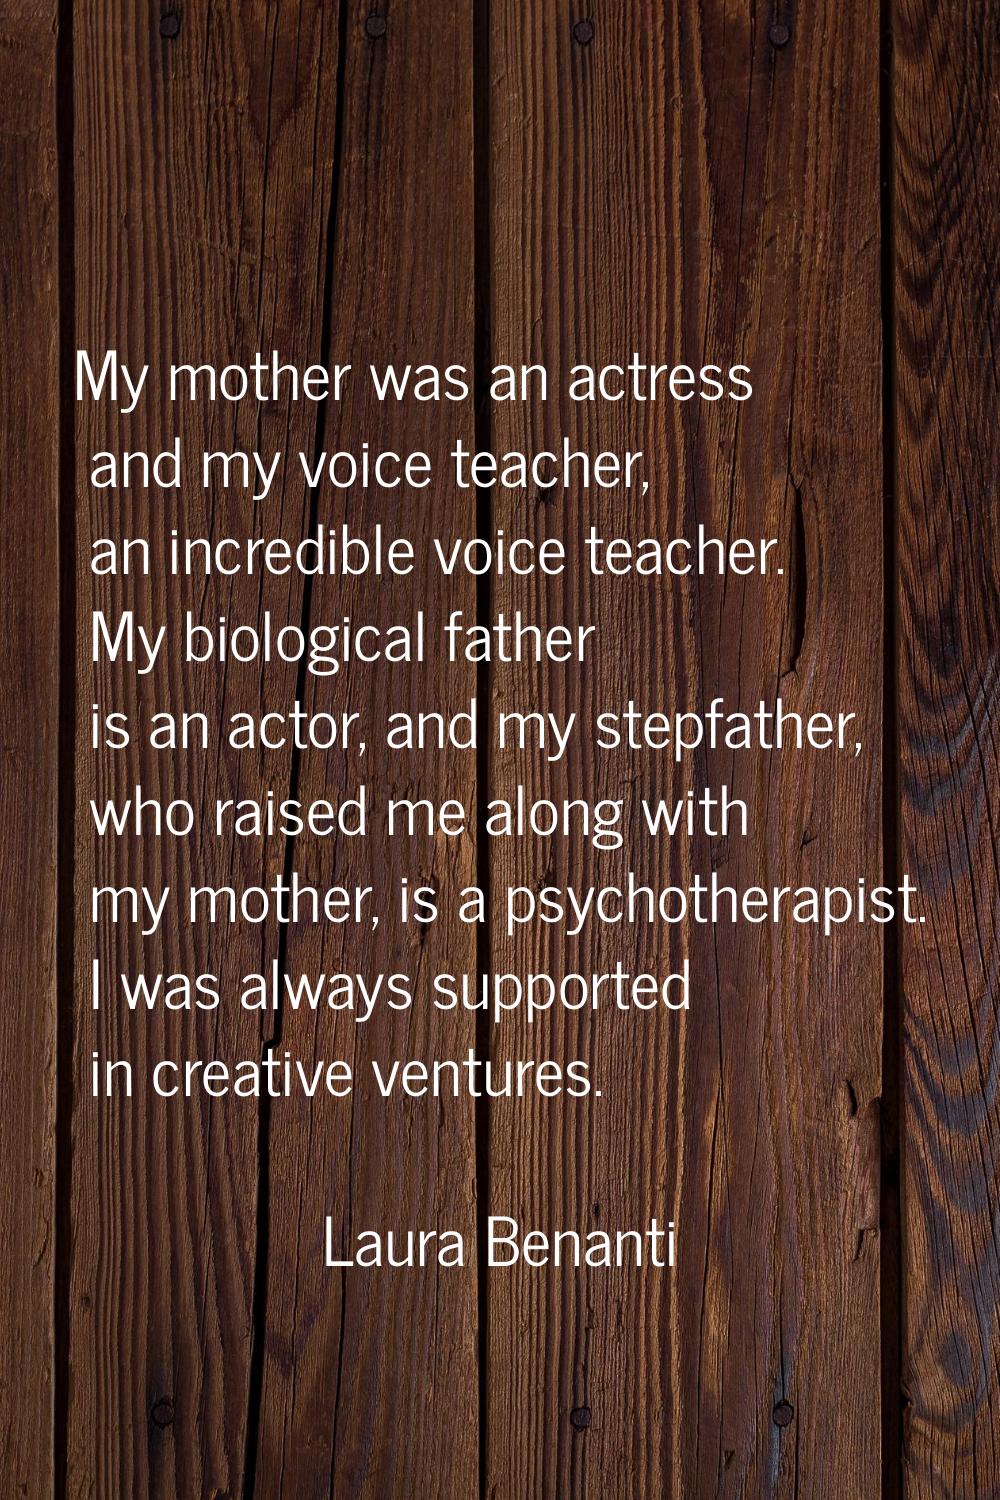 My mother was an actress and my voice teacher, an incredible voice teacher. My biological father is